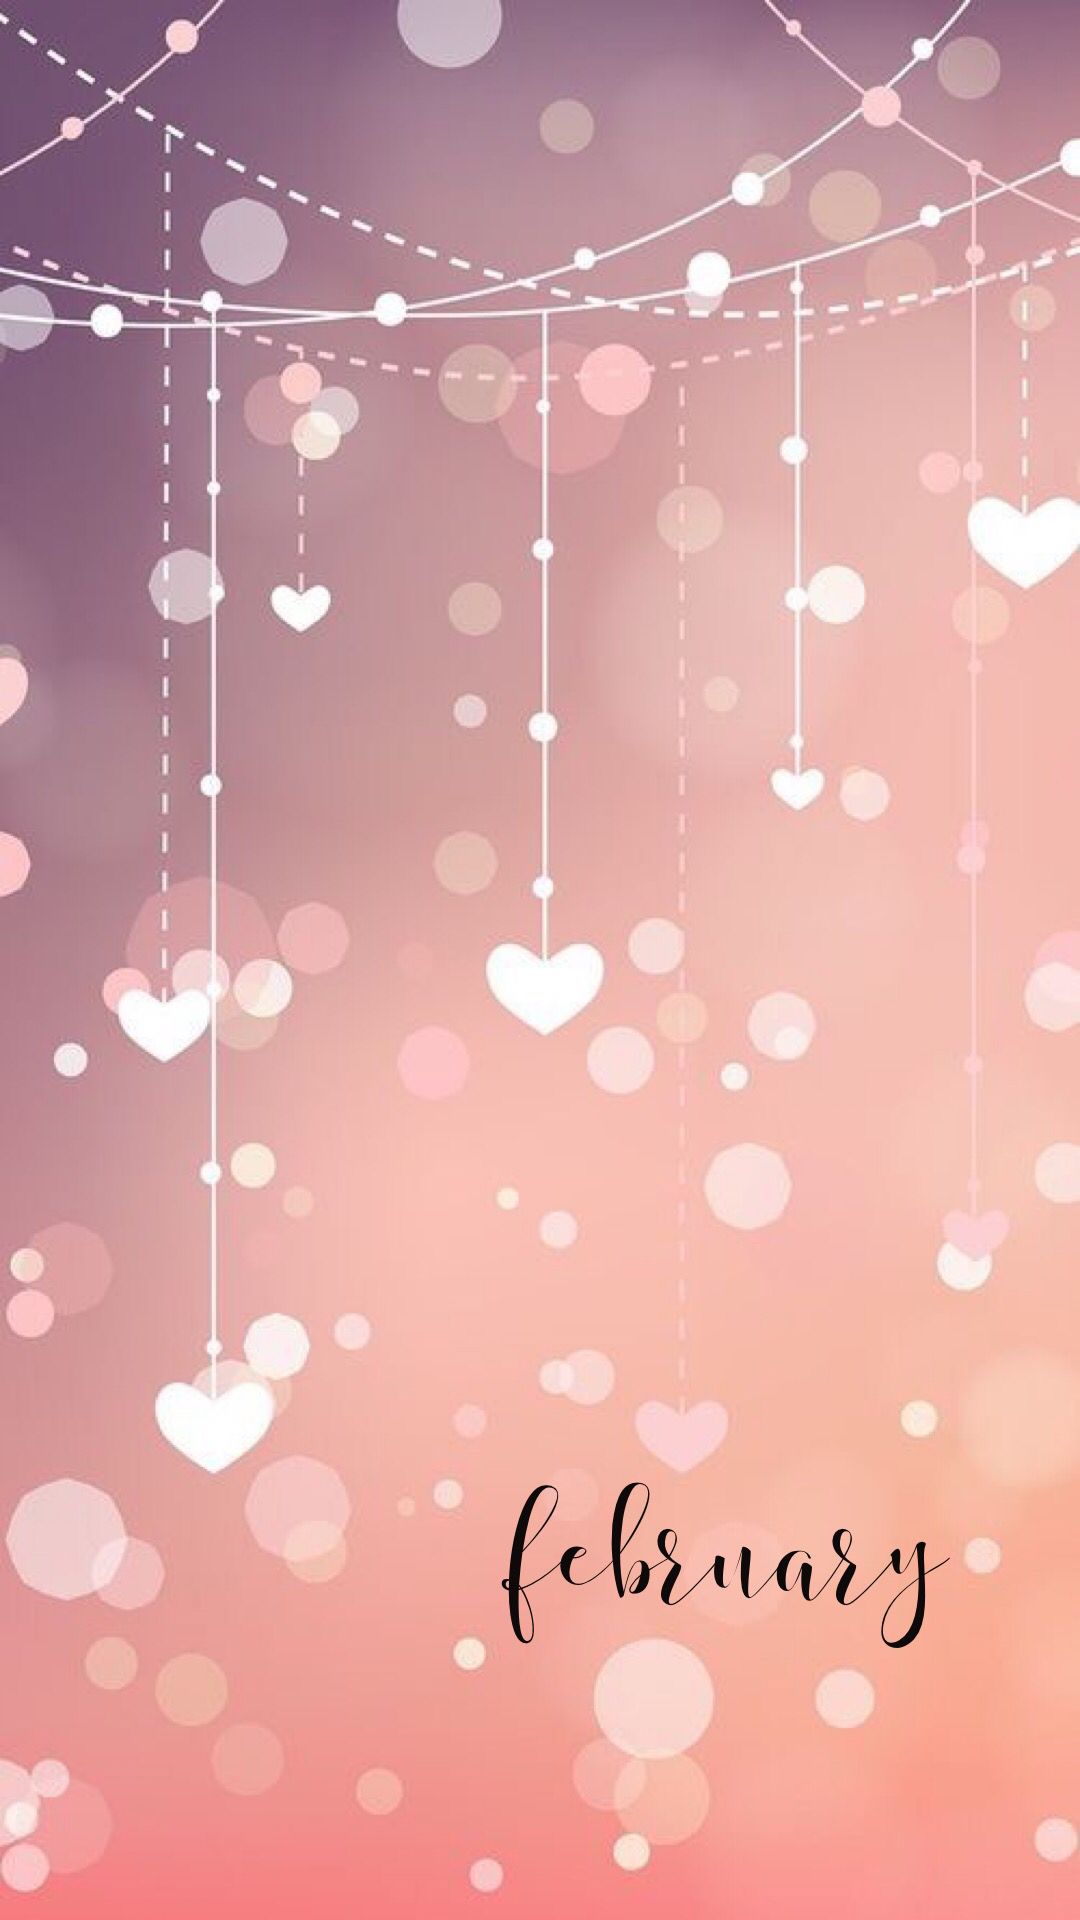 February wallpaper, pink wallpaper, hearts, valentines day, month wallpaper, phone background, wallpaper, lock screen, valentines day wallpaper, wallpaper, phone wallpaper, valentines day, february, phone background, phone wallpaper, wallpaper, phone background, wallpaper, phone background, wallpaper, phone background, wallpaper, phone background, wallpaper, phone background, wallpaper, phone background, wallpaper, phone background, wallpaper, phone background, wallpaper, phone background, wallpaper, phone background, wallpaper, phone background, wallpaper, phone background, wallpaper, phone background, wallpaper, phone background, wallpaper, phone background, wallpaper, phone background, wallpaper, phone background, wallpaper, phone background, wallpaper, phone background, wallpaper, phone background, wallpaper, phone background, wallpaper, phone background, wallpaper, phone background, wallpaper, phone background, wallpaper, phone background, wallpaper, phone background, wallpaper, phone background, wallpaper, phone background, wallpaper, phone background, wallpaper, phone background, wallpaper, phone background, wallpaper, phone background, wallpaper, phone background, wallpaper, phone background, wallpaper, phone background, wallpaper, phone background, wallpaper, phone background, wallpaper, phone background, wallpaper, phone background, wallpaper, phone background, wallpaper, phone background, wallpaper, phone background, wallpaper, phone background, wallpaper, phone background, wallpaper, phone background, wallpaper, phone background, wallpaper, phone background, wallpaper, phone background, wallpaper, phone background, wallpaper, phone background, wallpaper, phone background, wallpaper, phone background, wallpaper, phone background, wallpaper, phone background, wallpaper, phone background, wallpaper, phone background, wallpaper, phone background, wallpaper, phone background, wallpaper, phone background, wallpaper, phone background, wallpaper, phone background, wallpaper, phone background, wallpaper, phone background, wallpaper, phone background, wallpaper, phone background, wallpaper, phone background, wallpaper, phone background, wallpaper, phone background, wallpaper, phone background, wallpaper, phone background, wallpaper, phone background, wallpaper, phone background, wallpaper, phone background, wallpaper, phone background, wallpaper, phone background, wallpaper, phone background, wallpaper, phone background, wallpaper, phone background, wallpaper, phone background, wallpaper, phone background, wallpaper, phone background, wallpaper, phone background, wallpaper, phone background, wallpaper, phone background, wallpaper, phone background, wallpaper, phone background, wallpaper, phone background, wallpaper, phone background, wallpaper, phone background, wallpaper, phone background, wallpaper, phone background, wallpaper, phone background, wallpaper, - February